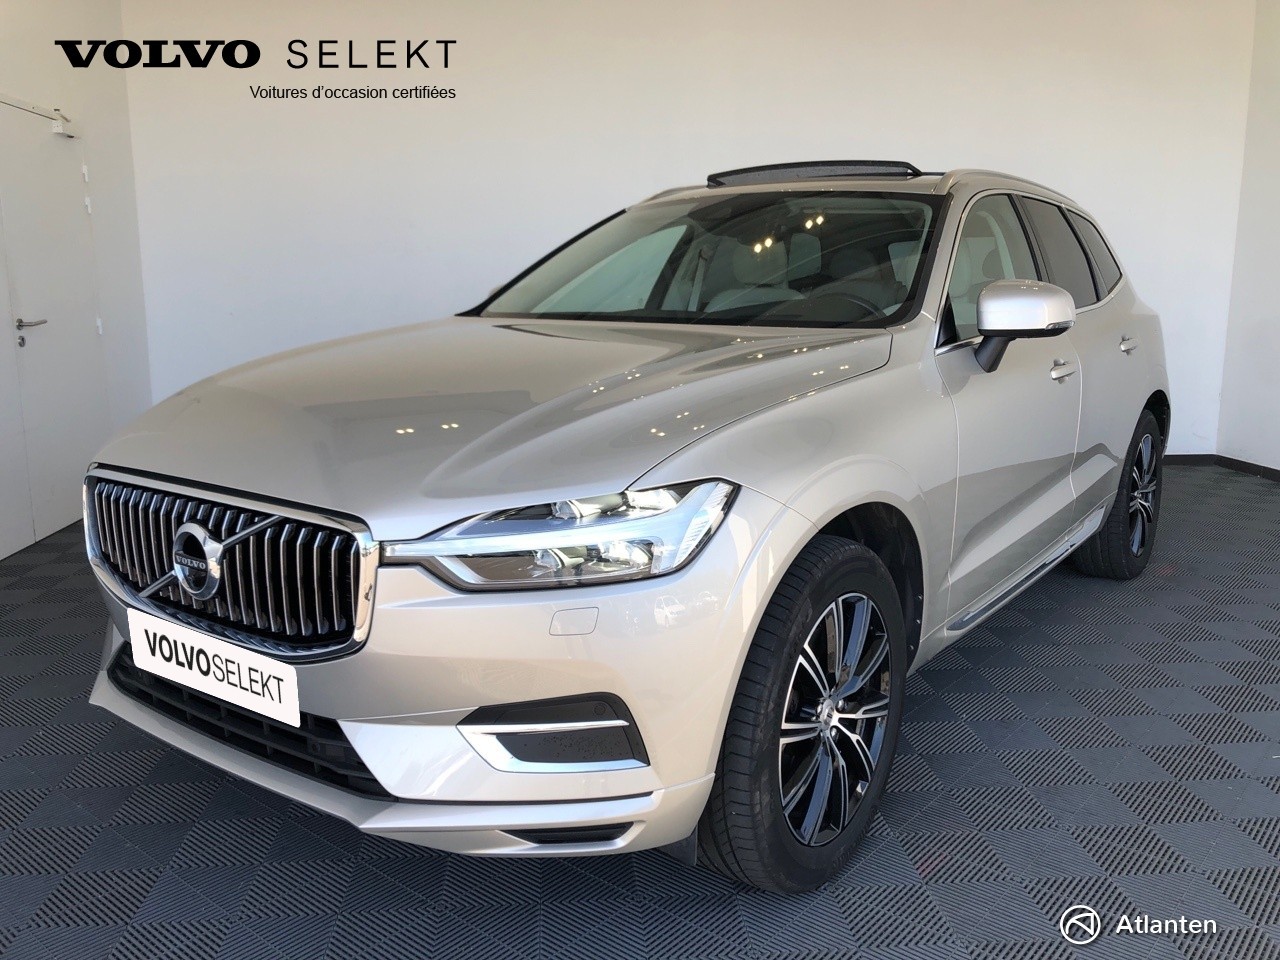 VOLVO XC60 XC60 D4 AWD 190 ch Geartronic 8 - Véhicule Occasion Océane Auto